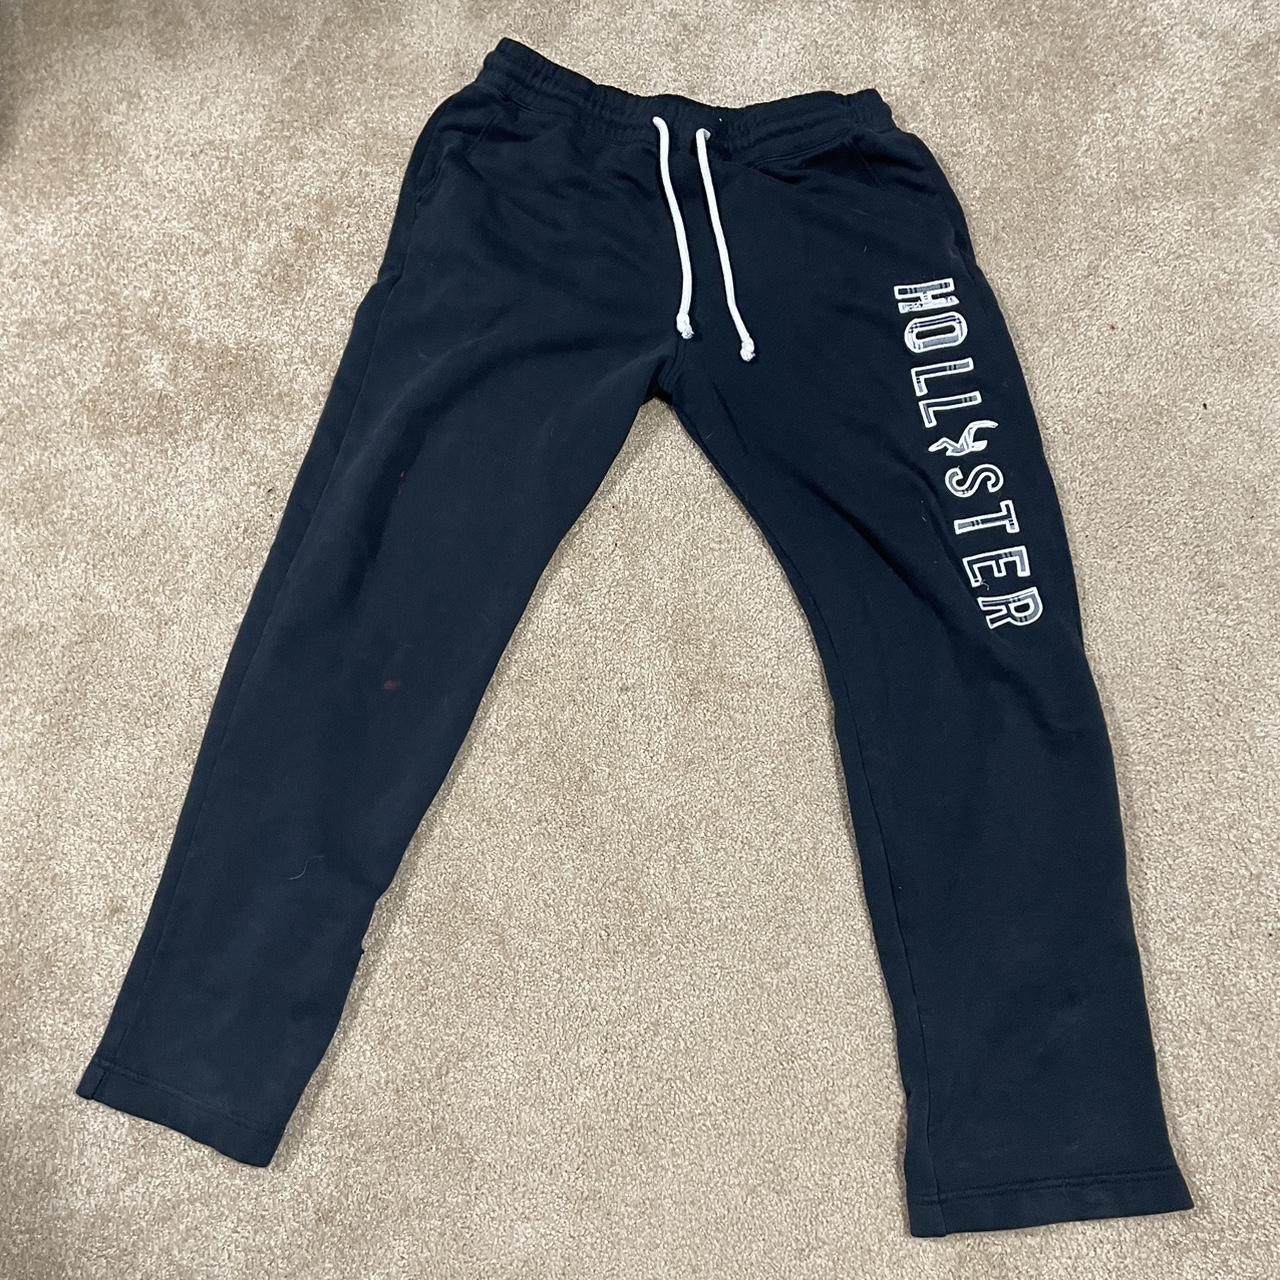 Men's Hollister Joggers Size medium Small stain on - Depop